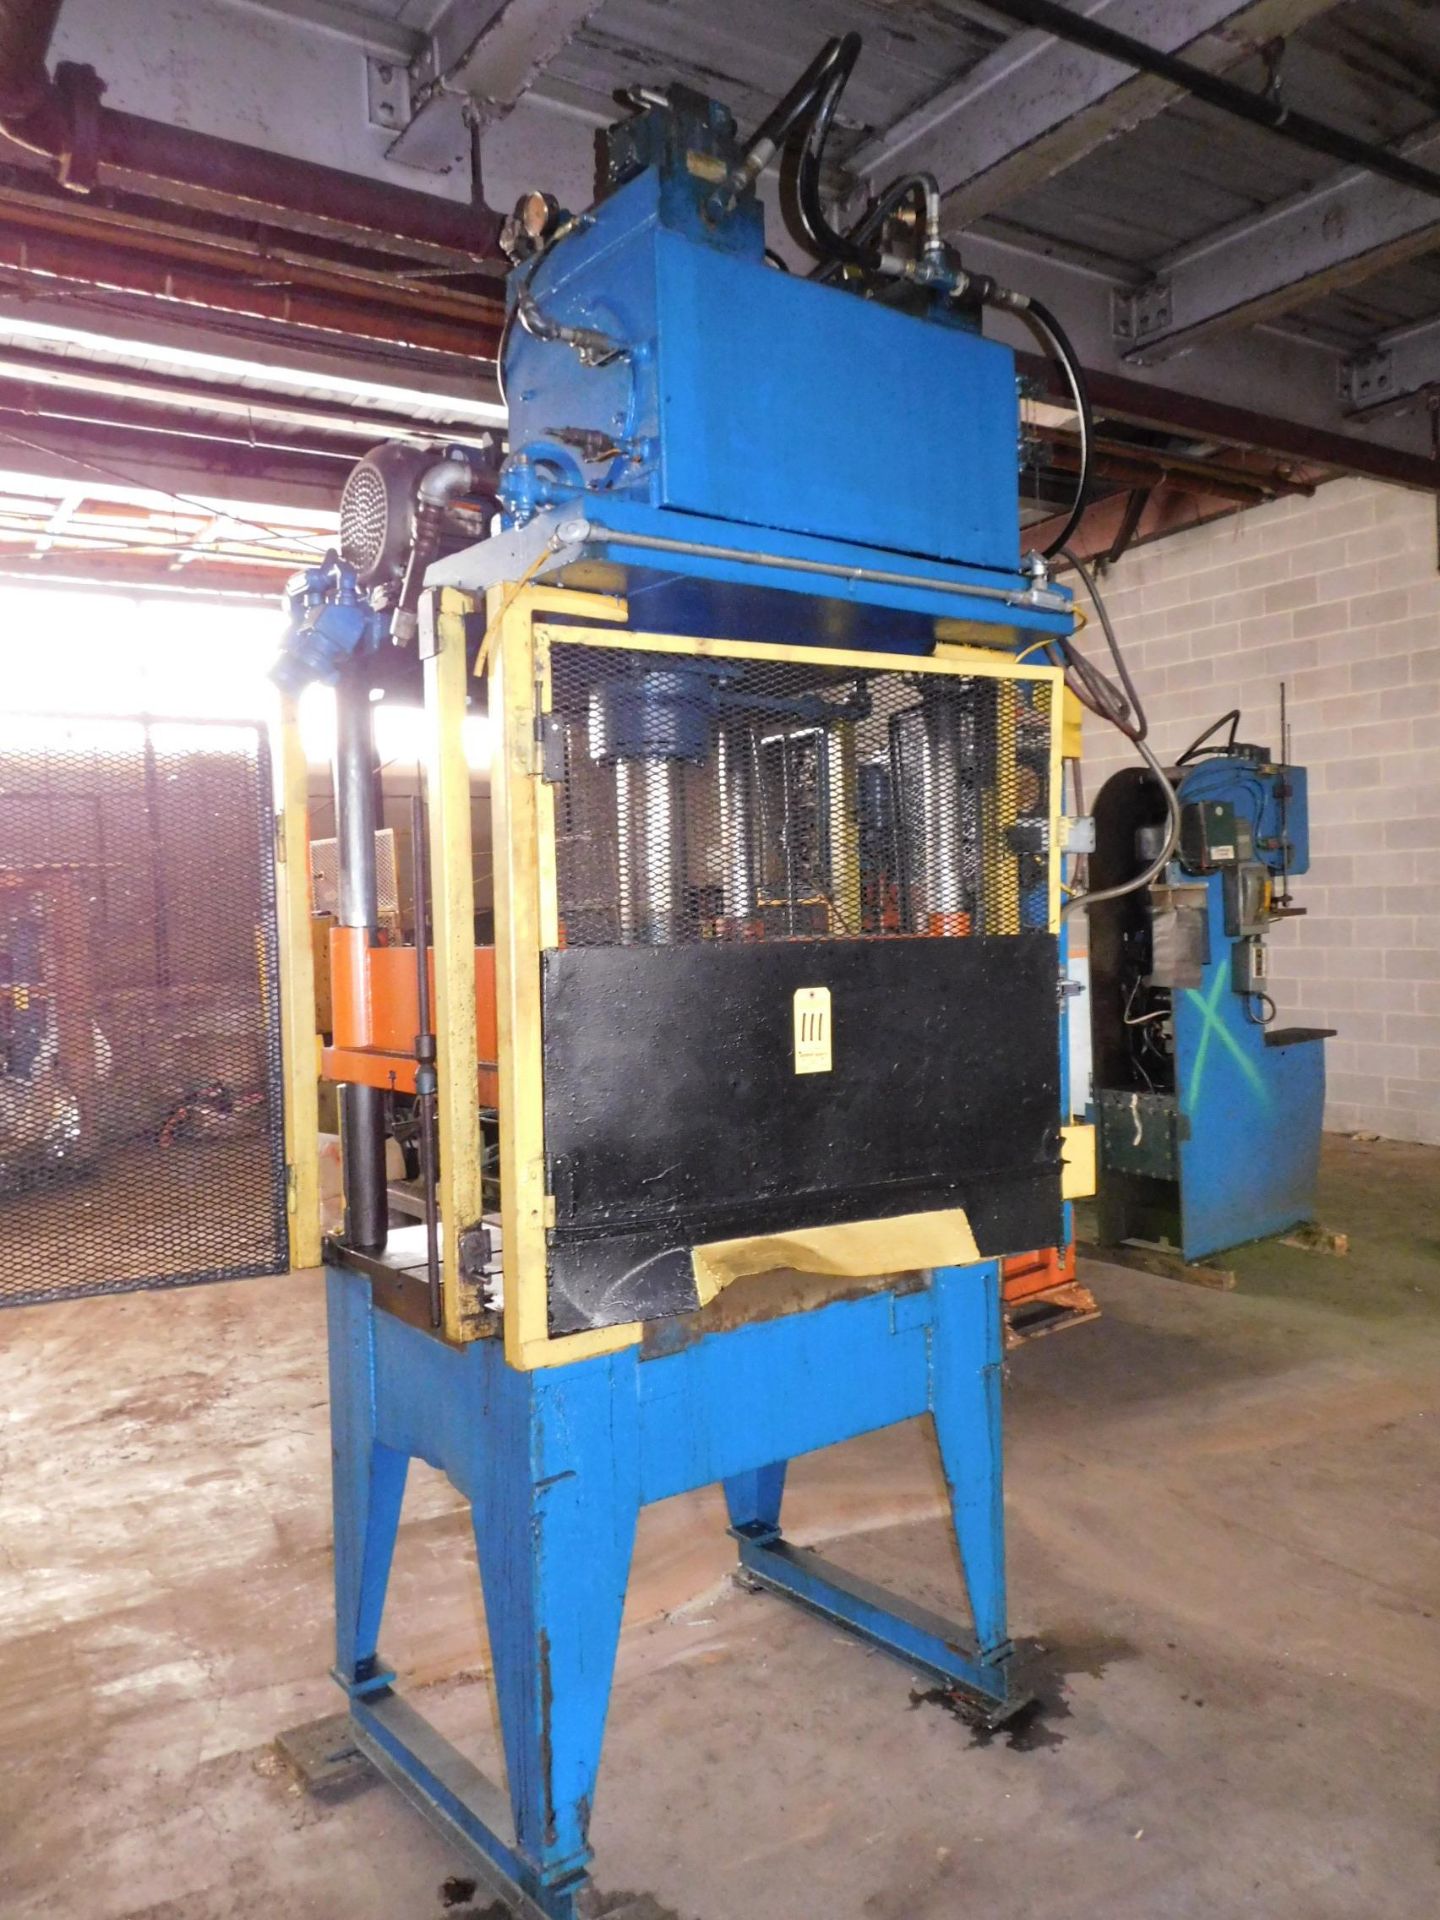 4-Post Hydraulic Press, 32" X 44" Bed and Ram, Approx. 12" Stroke, 13" Daylight with Ram Down